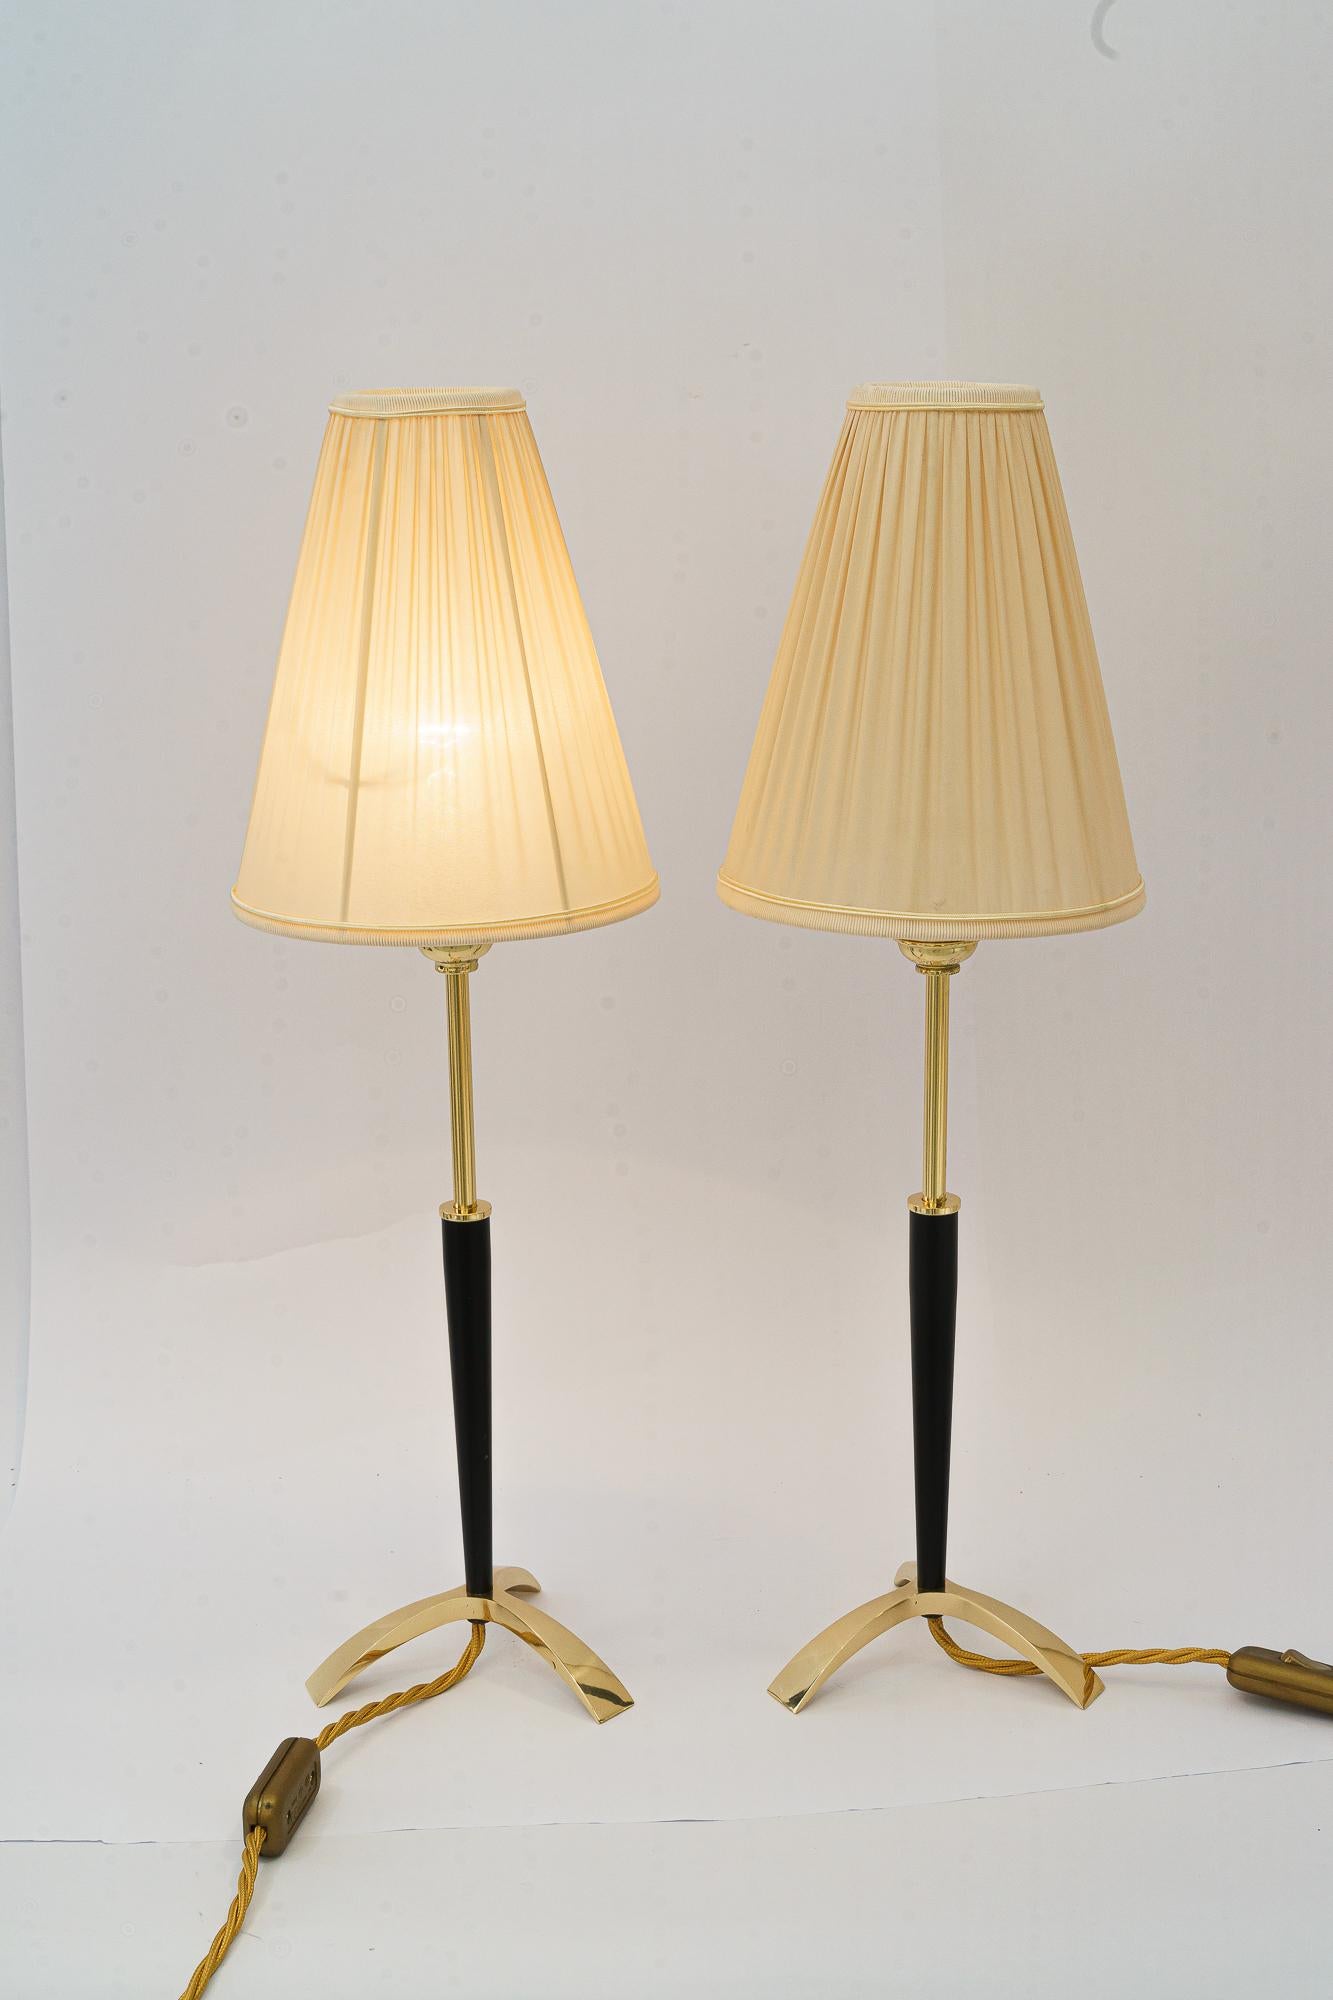 Two Extendable Table Lamps by J.T. Kalmar, circa 1950s
Adjustable from 43cm up to 54cm 
Brass polished and stove enameled
The fabric shade is replaced ( new )